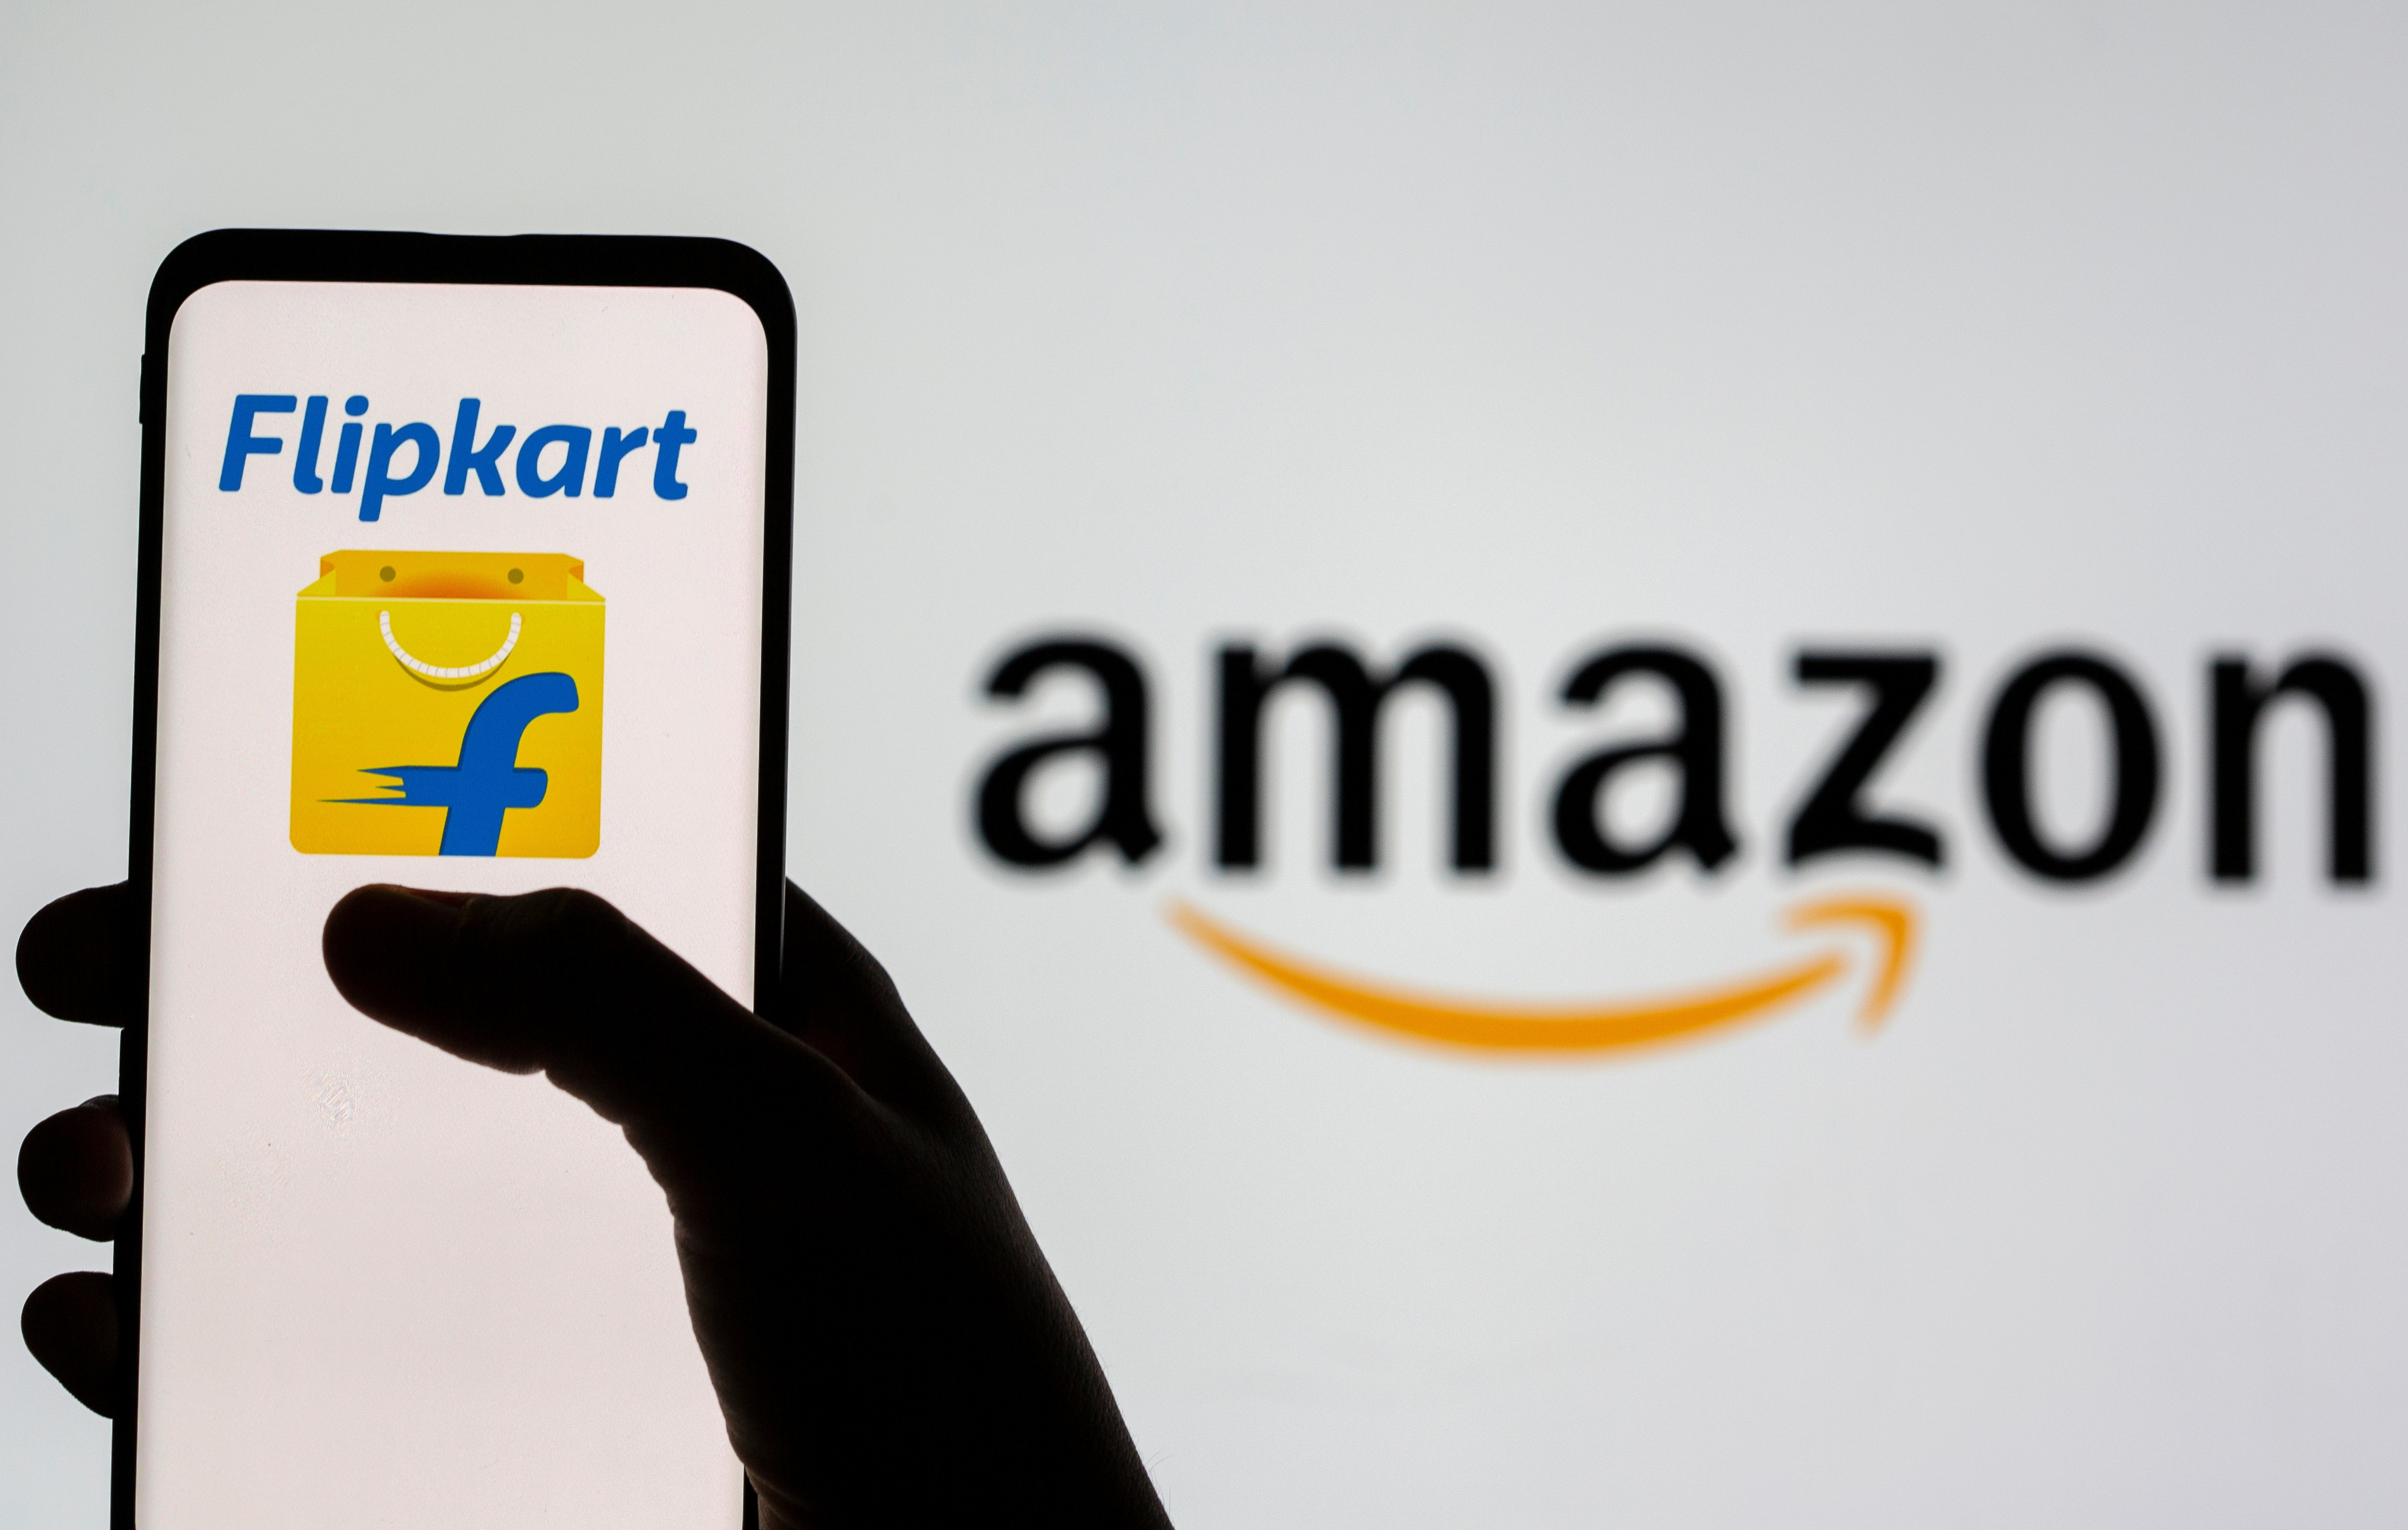 Smartphone with Flipkart logo is seen in front of displayed Amazon logo in this illustration taken